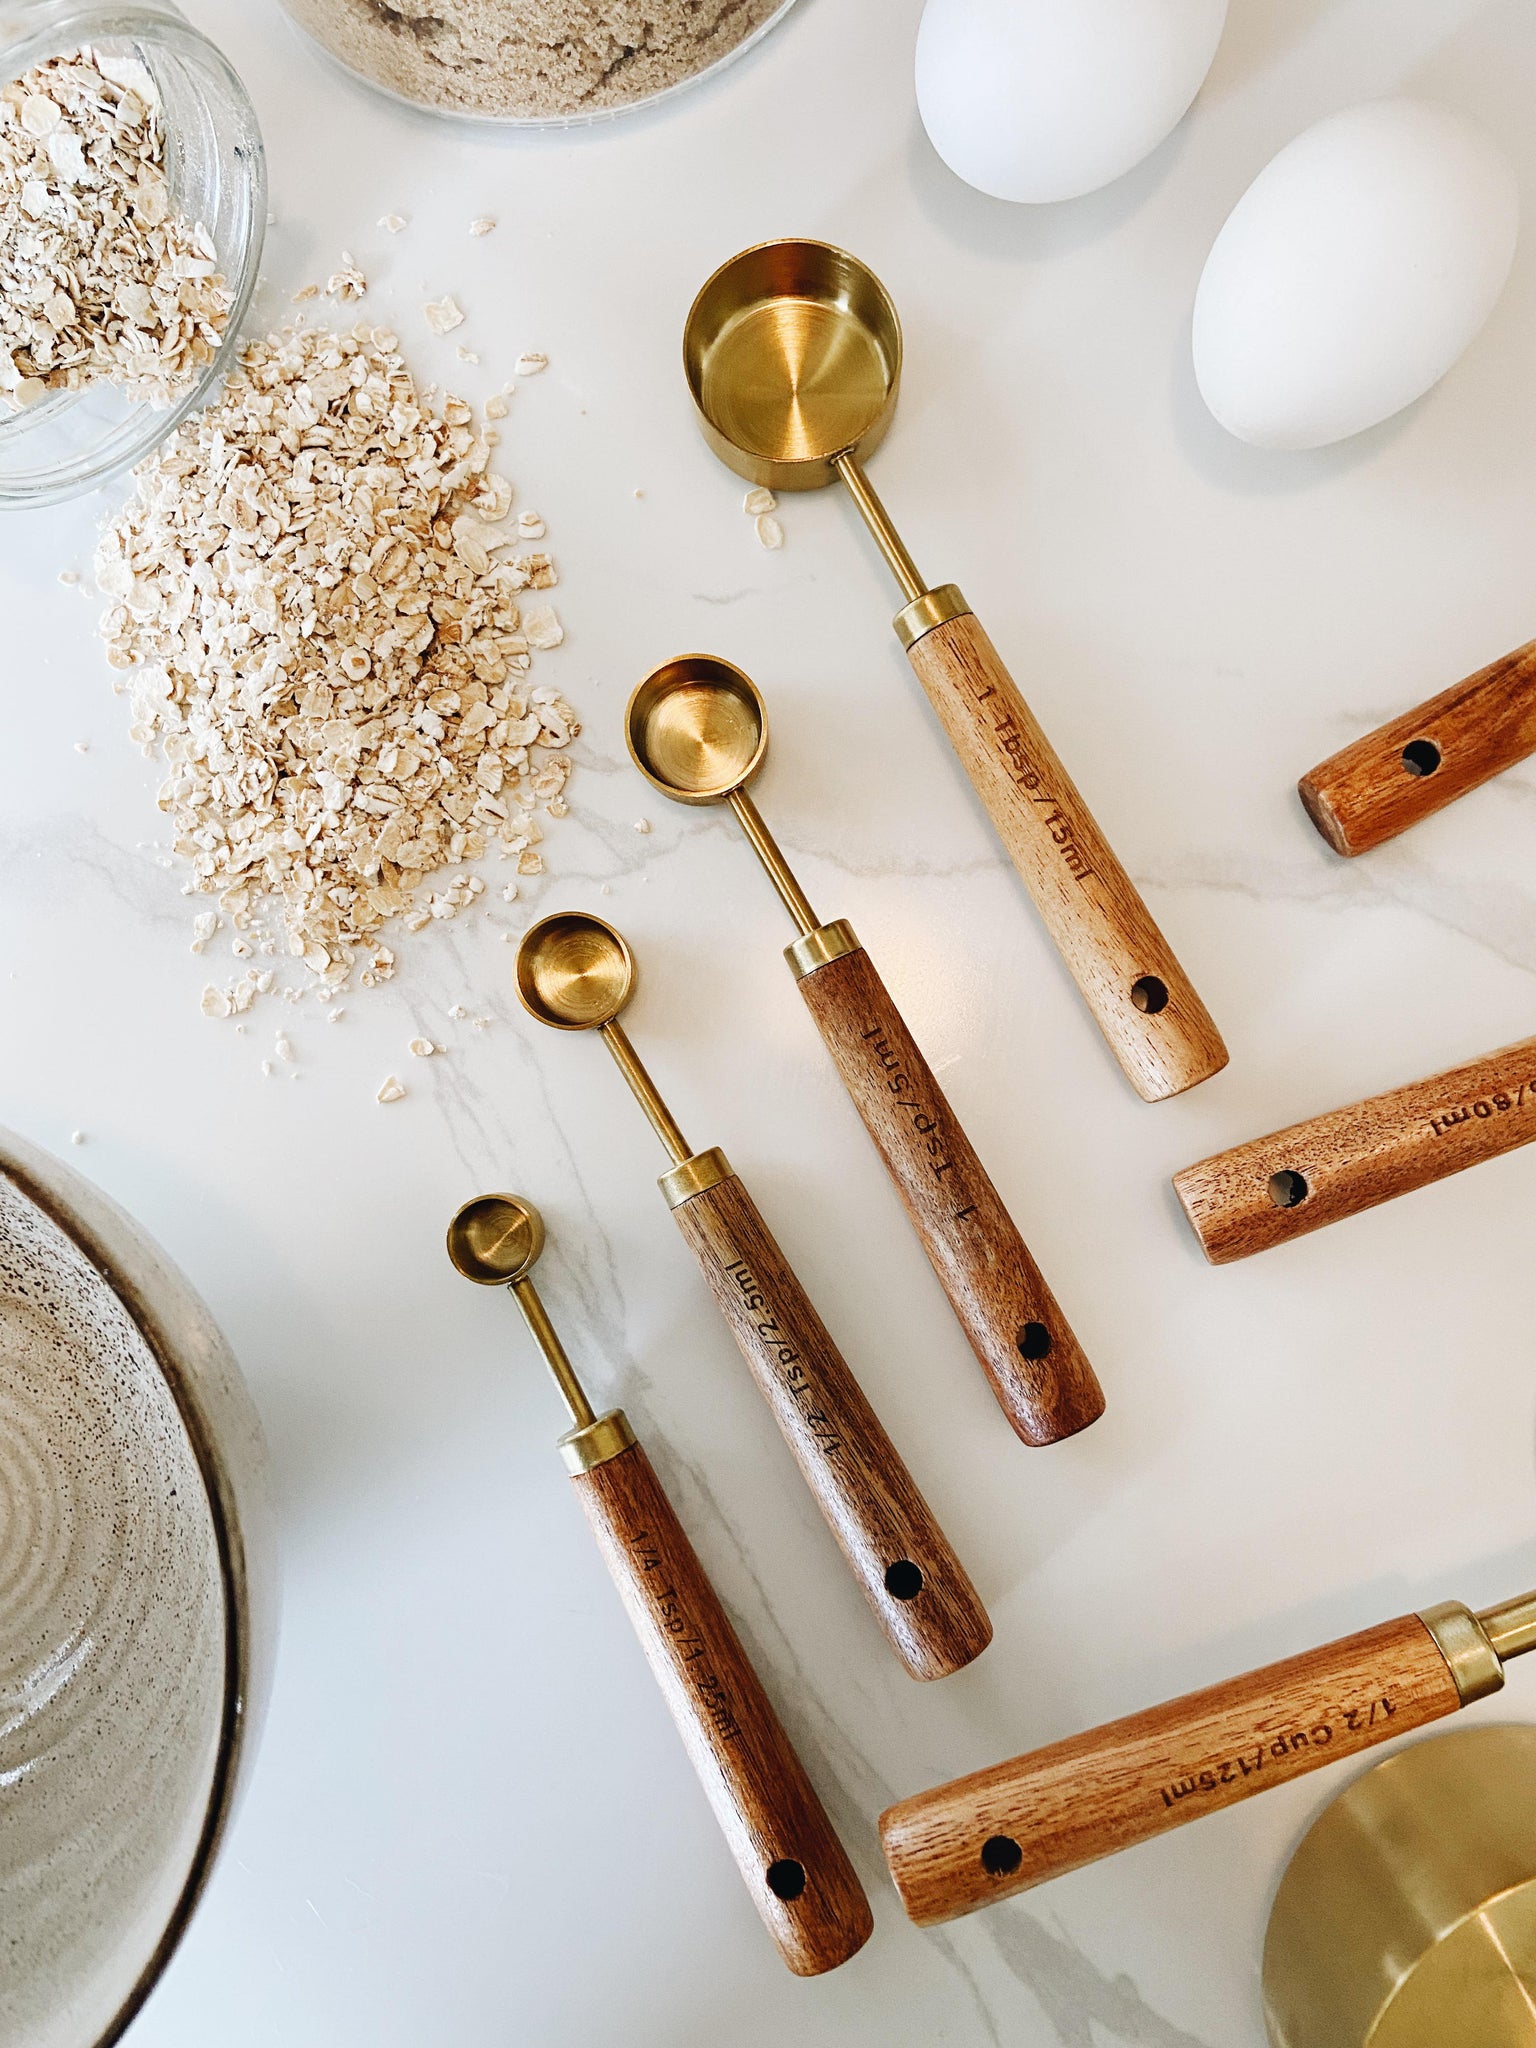 PrettyFine Collection 8 Piece Gold Measuring Cups Set and Measuring Spoons,  Golden With fragrant wood Handles-Complete Set of Measure Cups and Spoons